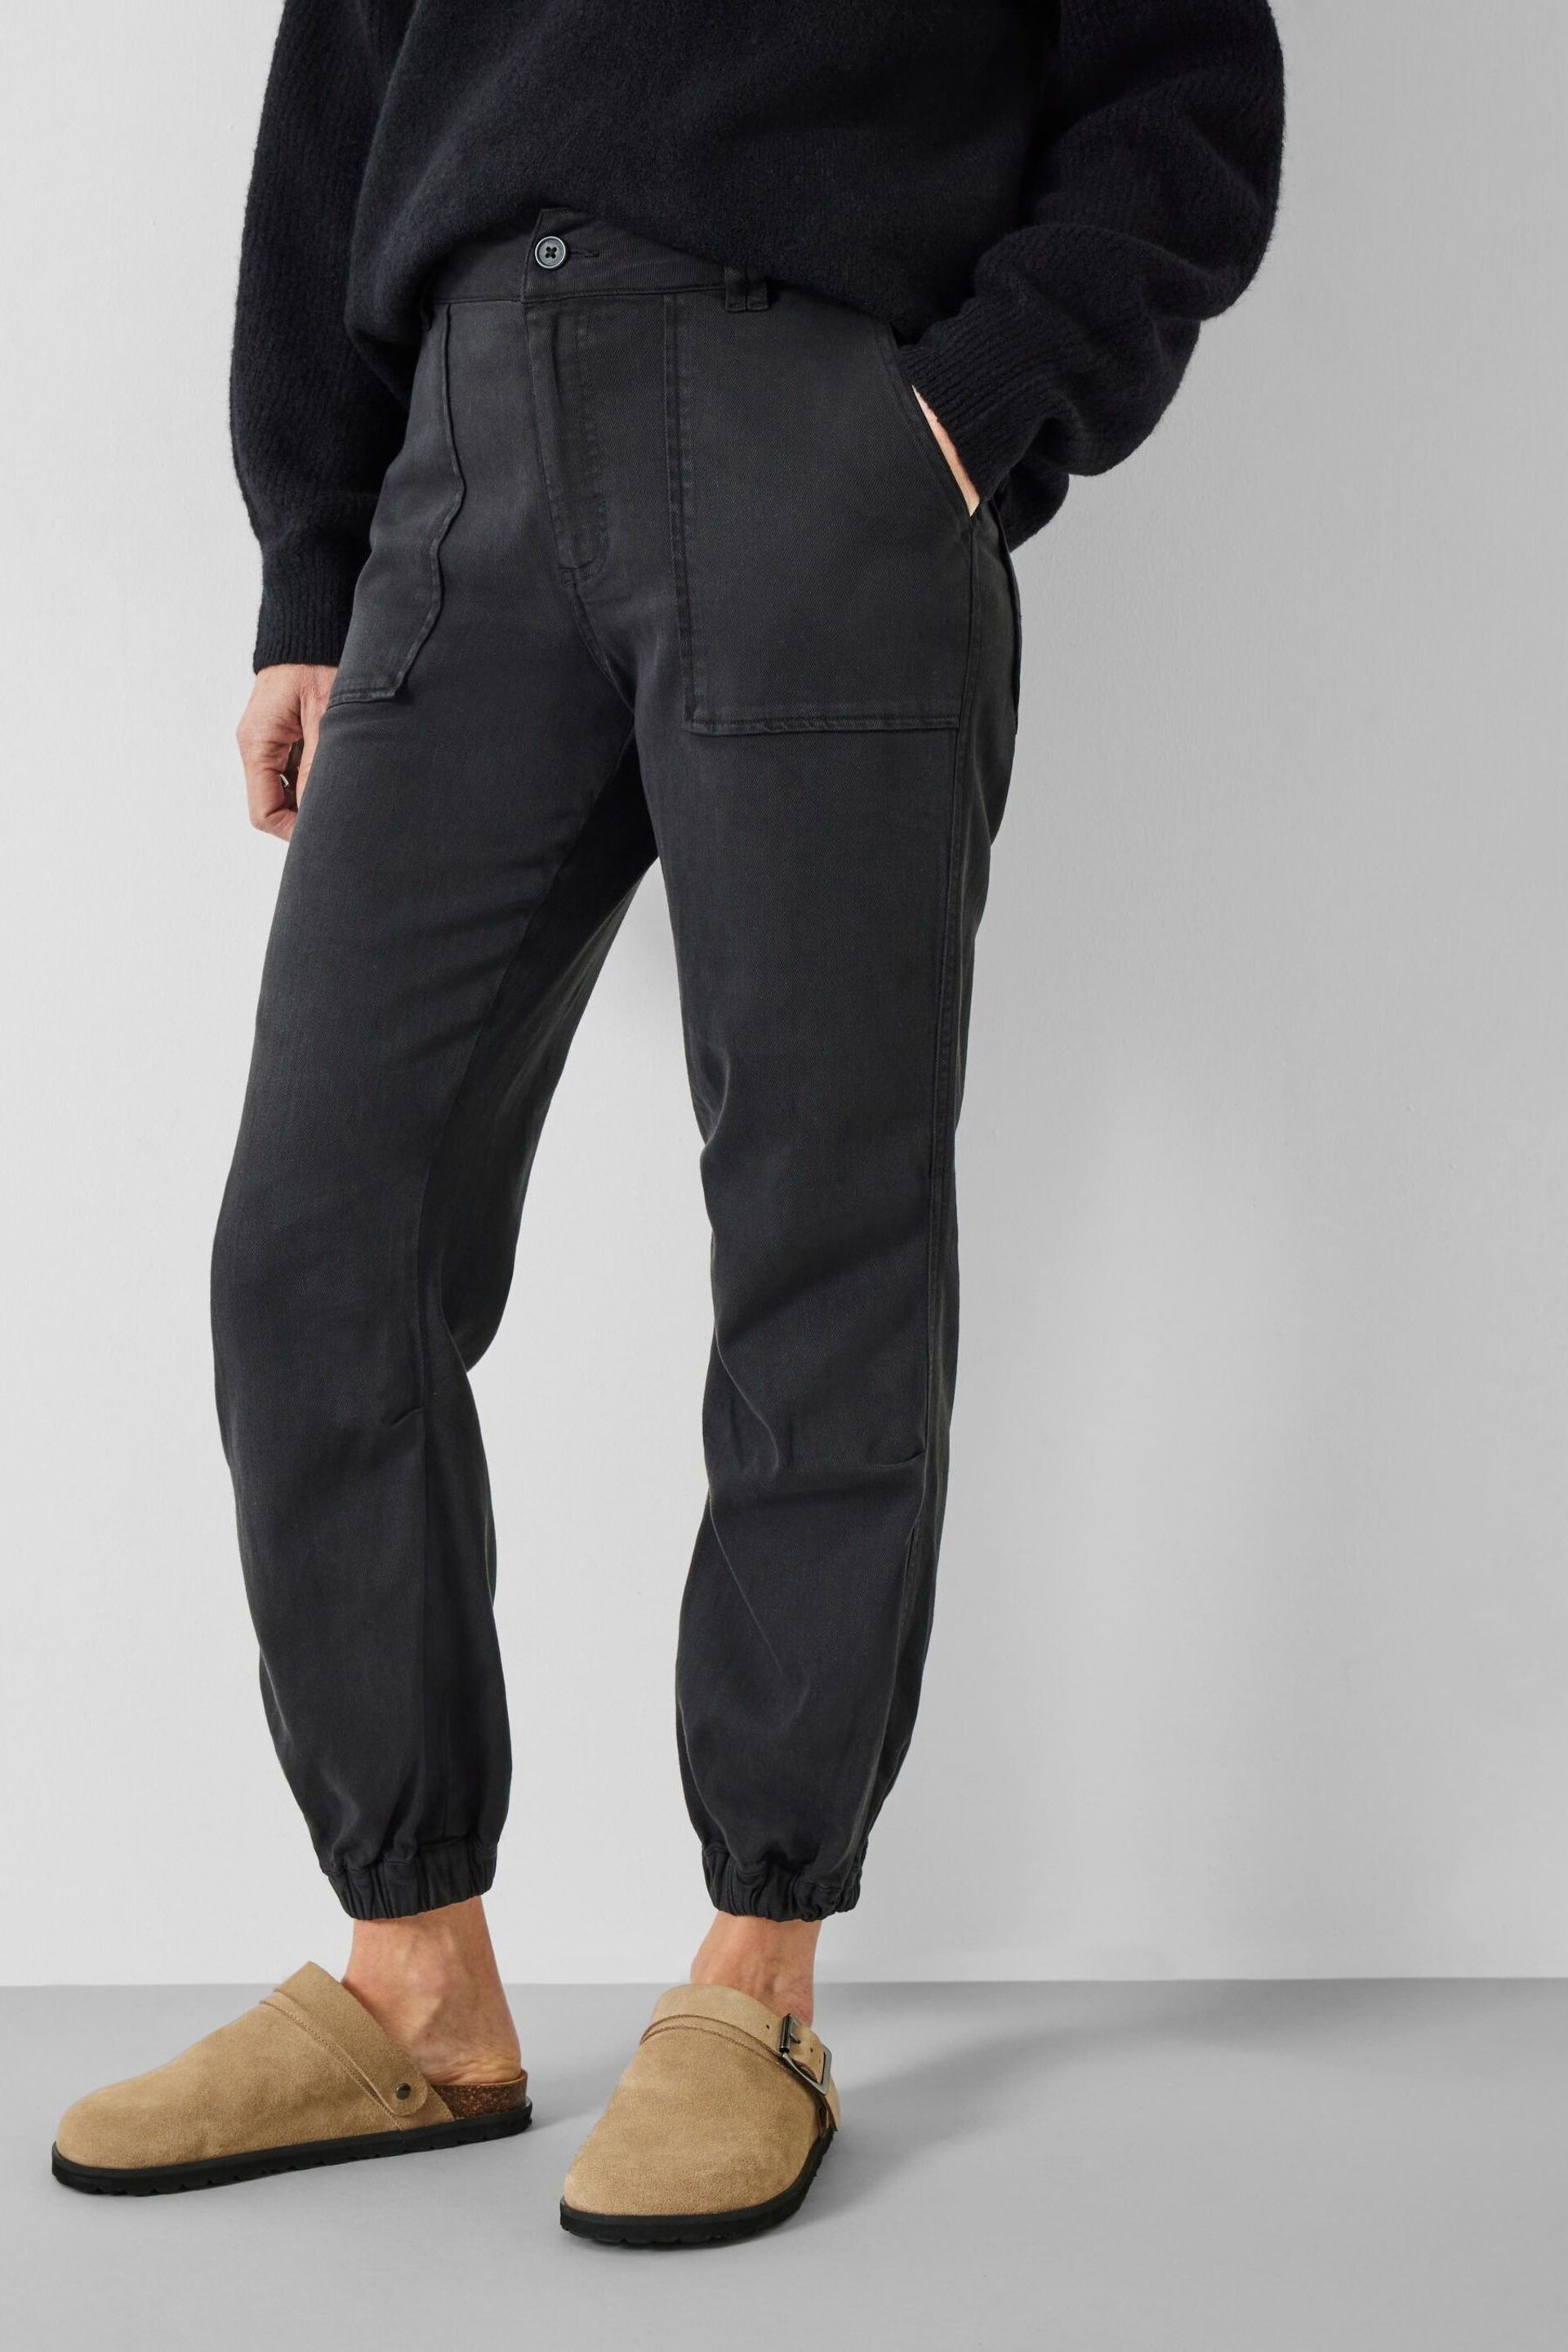 Hush Black Riley Washed Cargo Trousers - Image 1 of 5